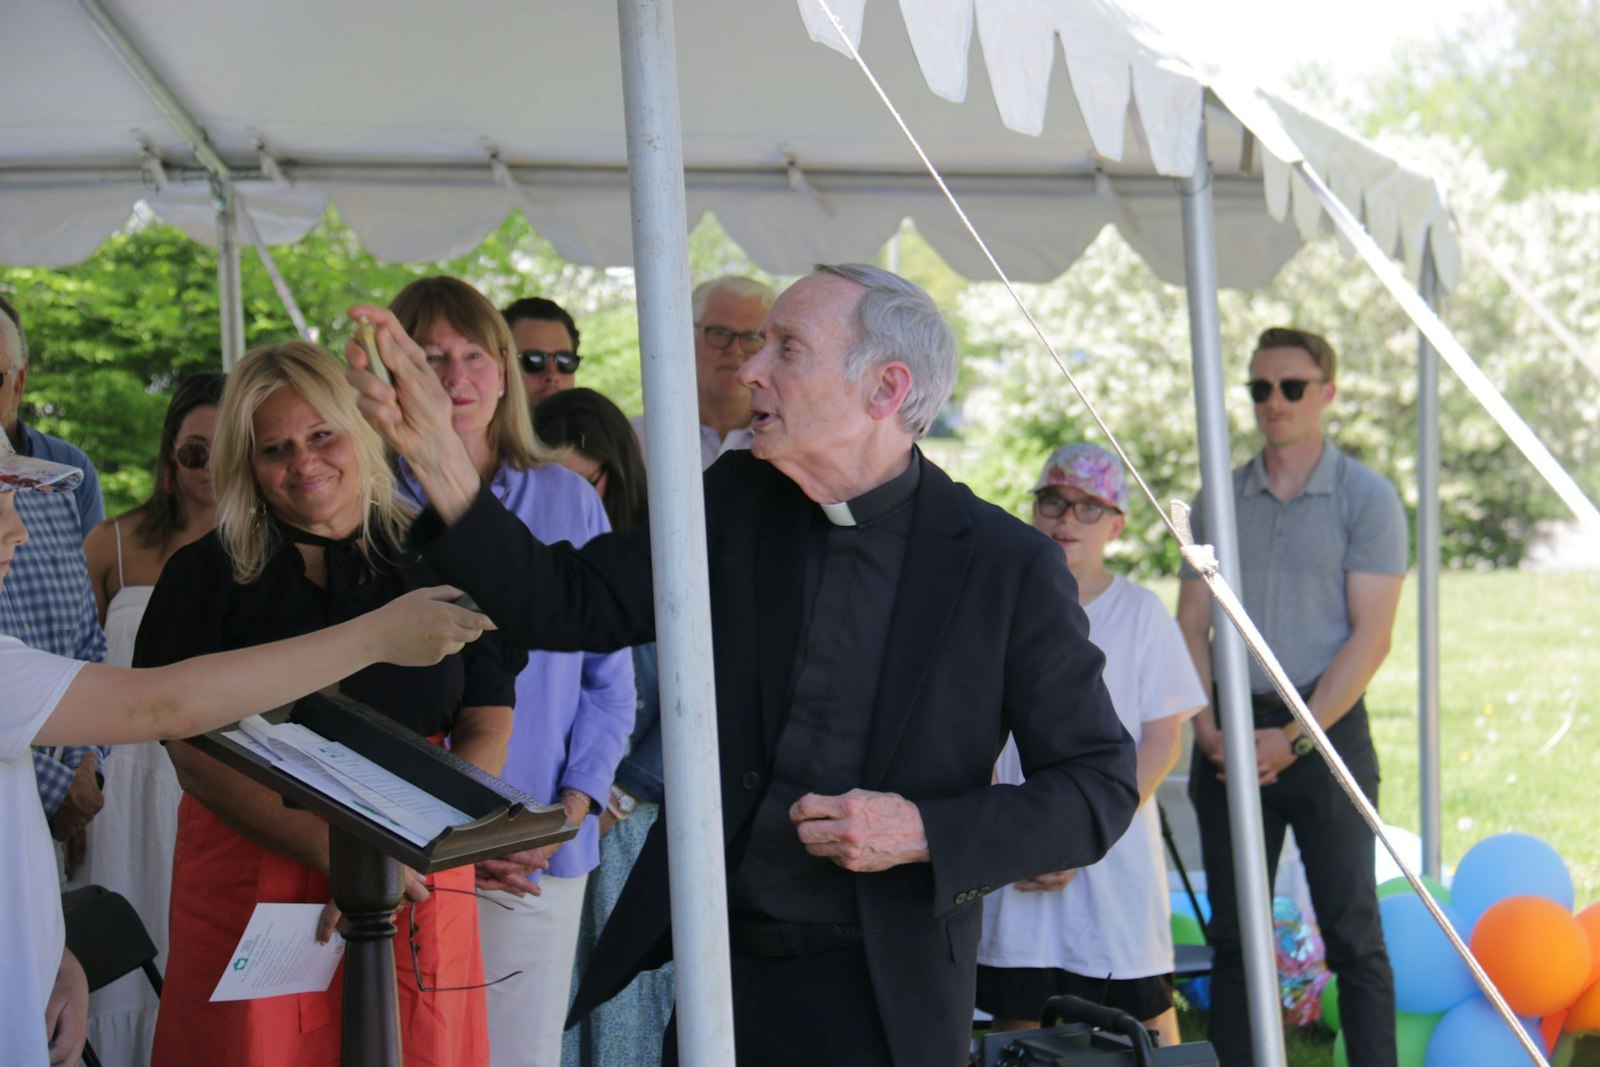 Msgr. John Zenz blesses the ground upon which the new Christ Child House will be built. The new location is one block down the street from the current location.